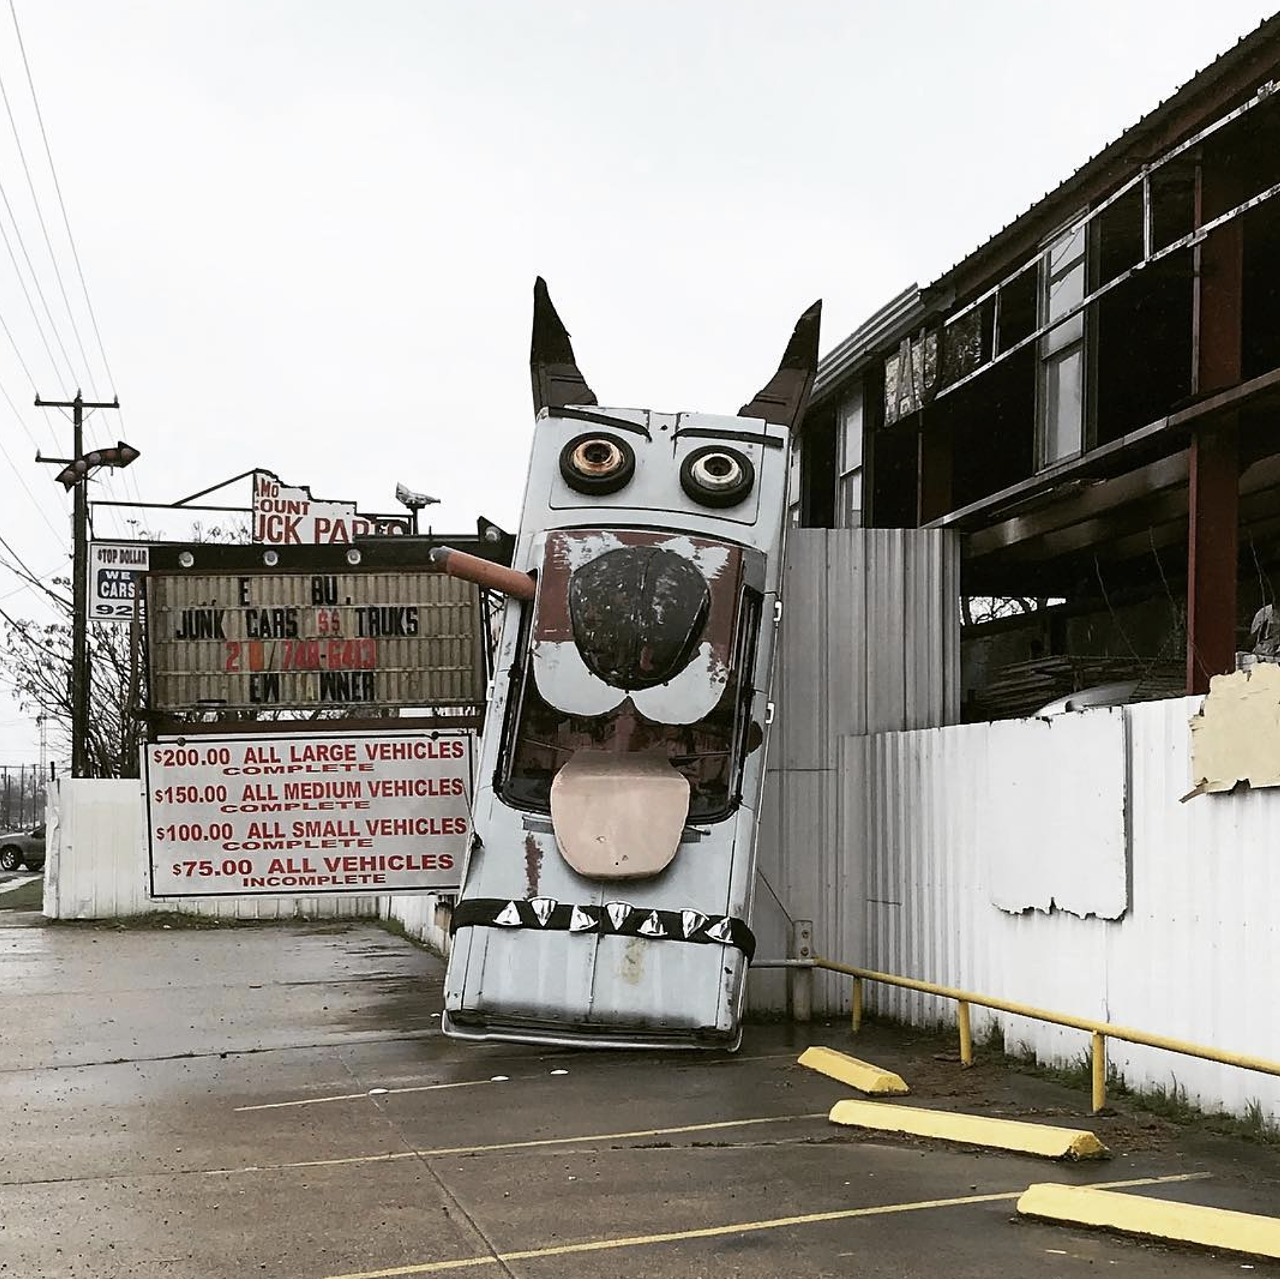 Junk Yard Dog, San Antonio, TX
1201 Somerset Road, San Antonio, roadsideamerica.com
This canny canine is made by the same artist as the giant cowboy boots which sit outside of North Star Mall. Bob "Daddy-O" Wade, who passed away in late 2019, built the pup out of cars in his junk yard: a 1966 Plymouth Fury, a Volkswagen Beetle and the hood of a Cadillac.
Photo via Instagram /  richardjgarciacpa